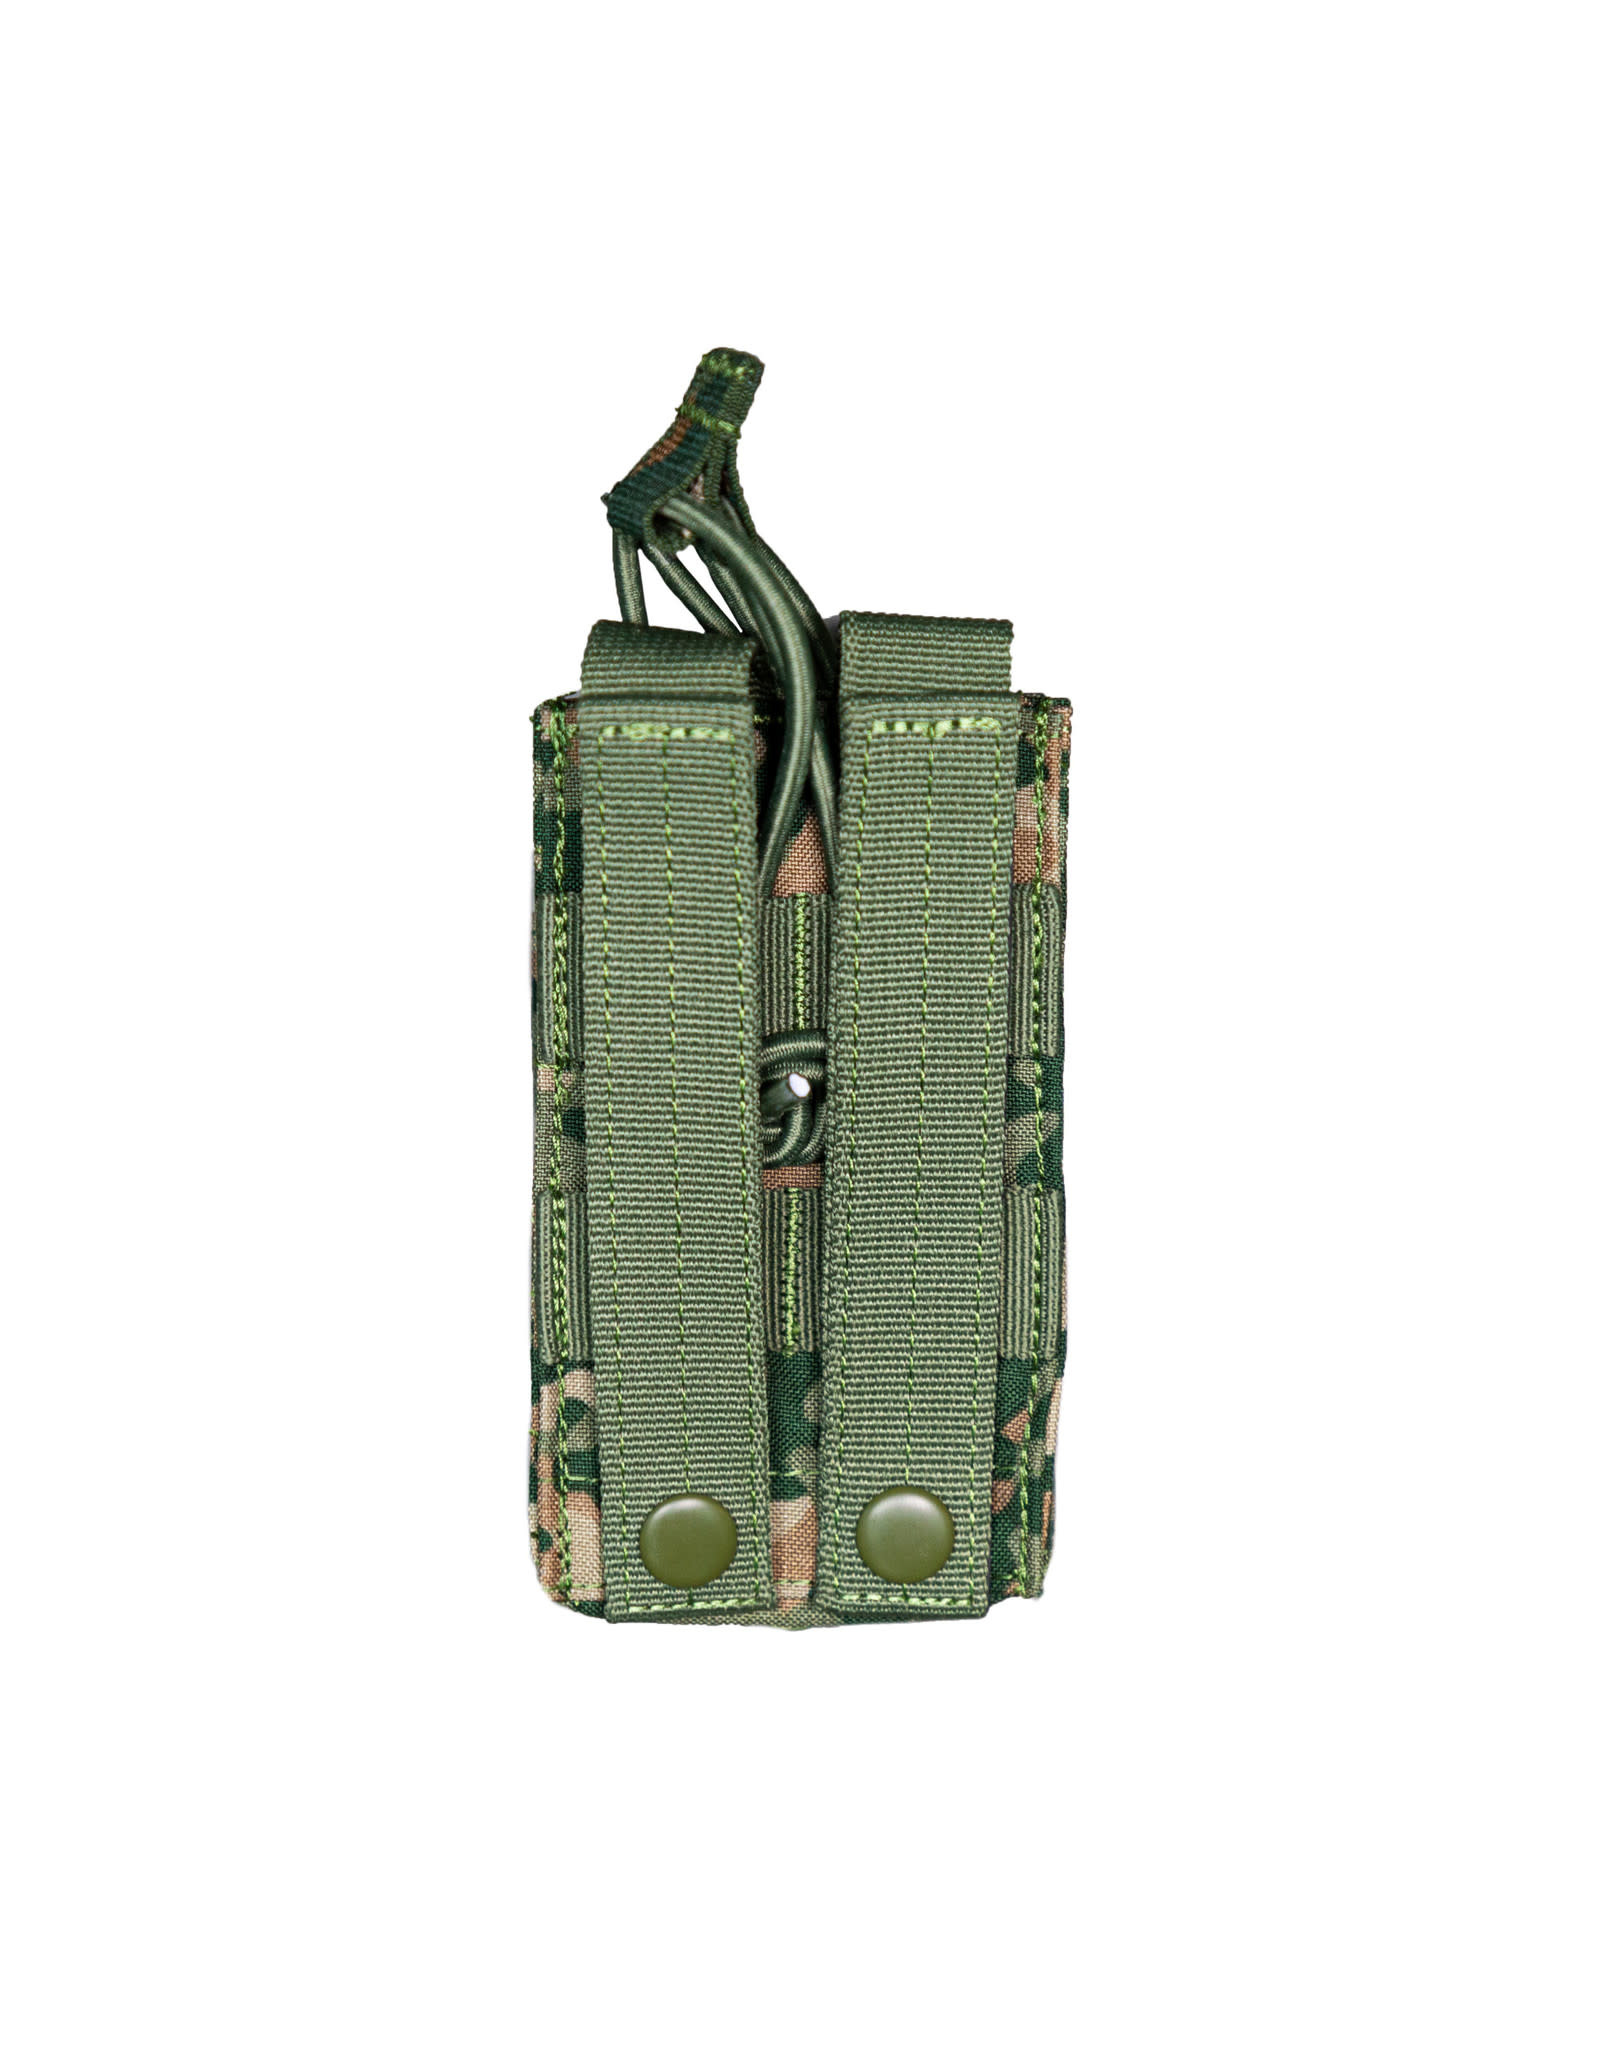 Dutch Tactical Gear Dutch Tactical Gear Single Open Stacked Mag Pouch 5.56 - NFP